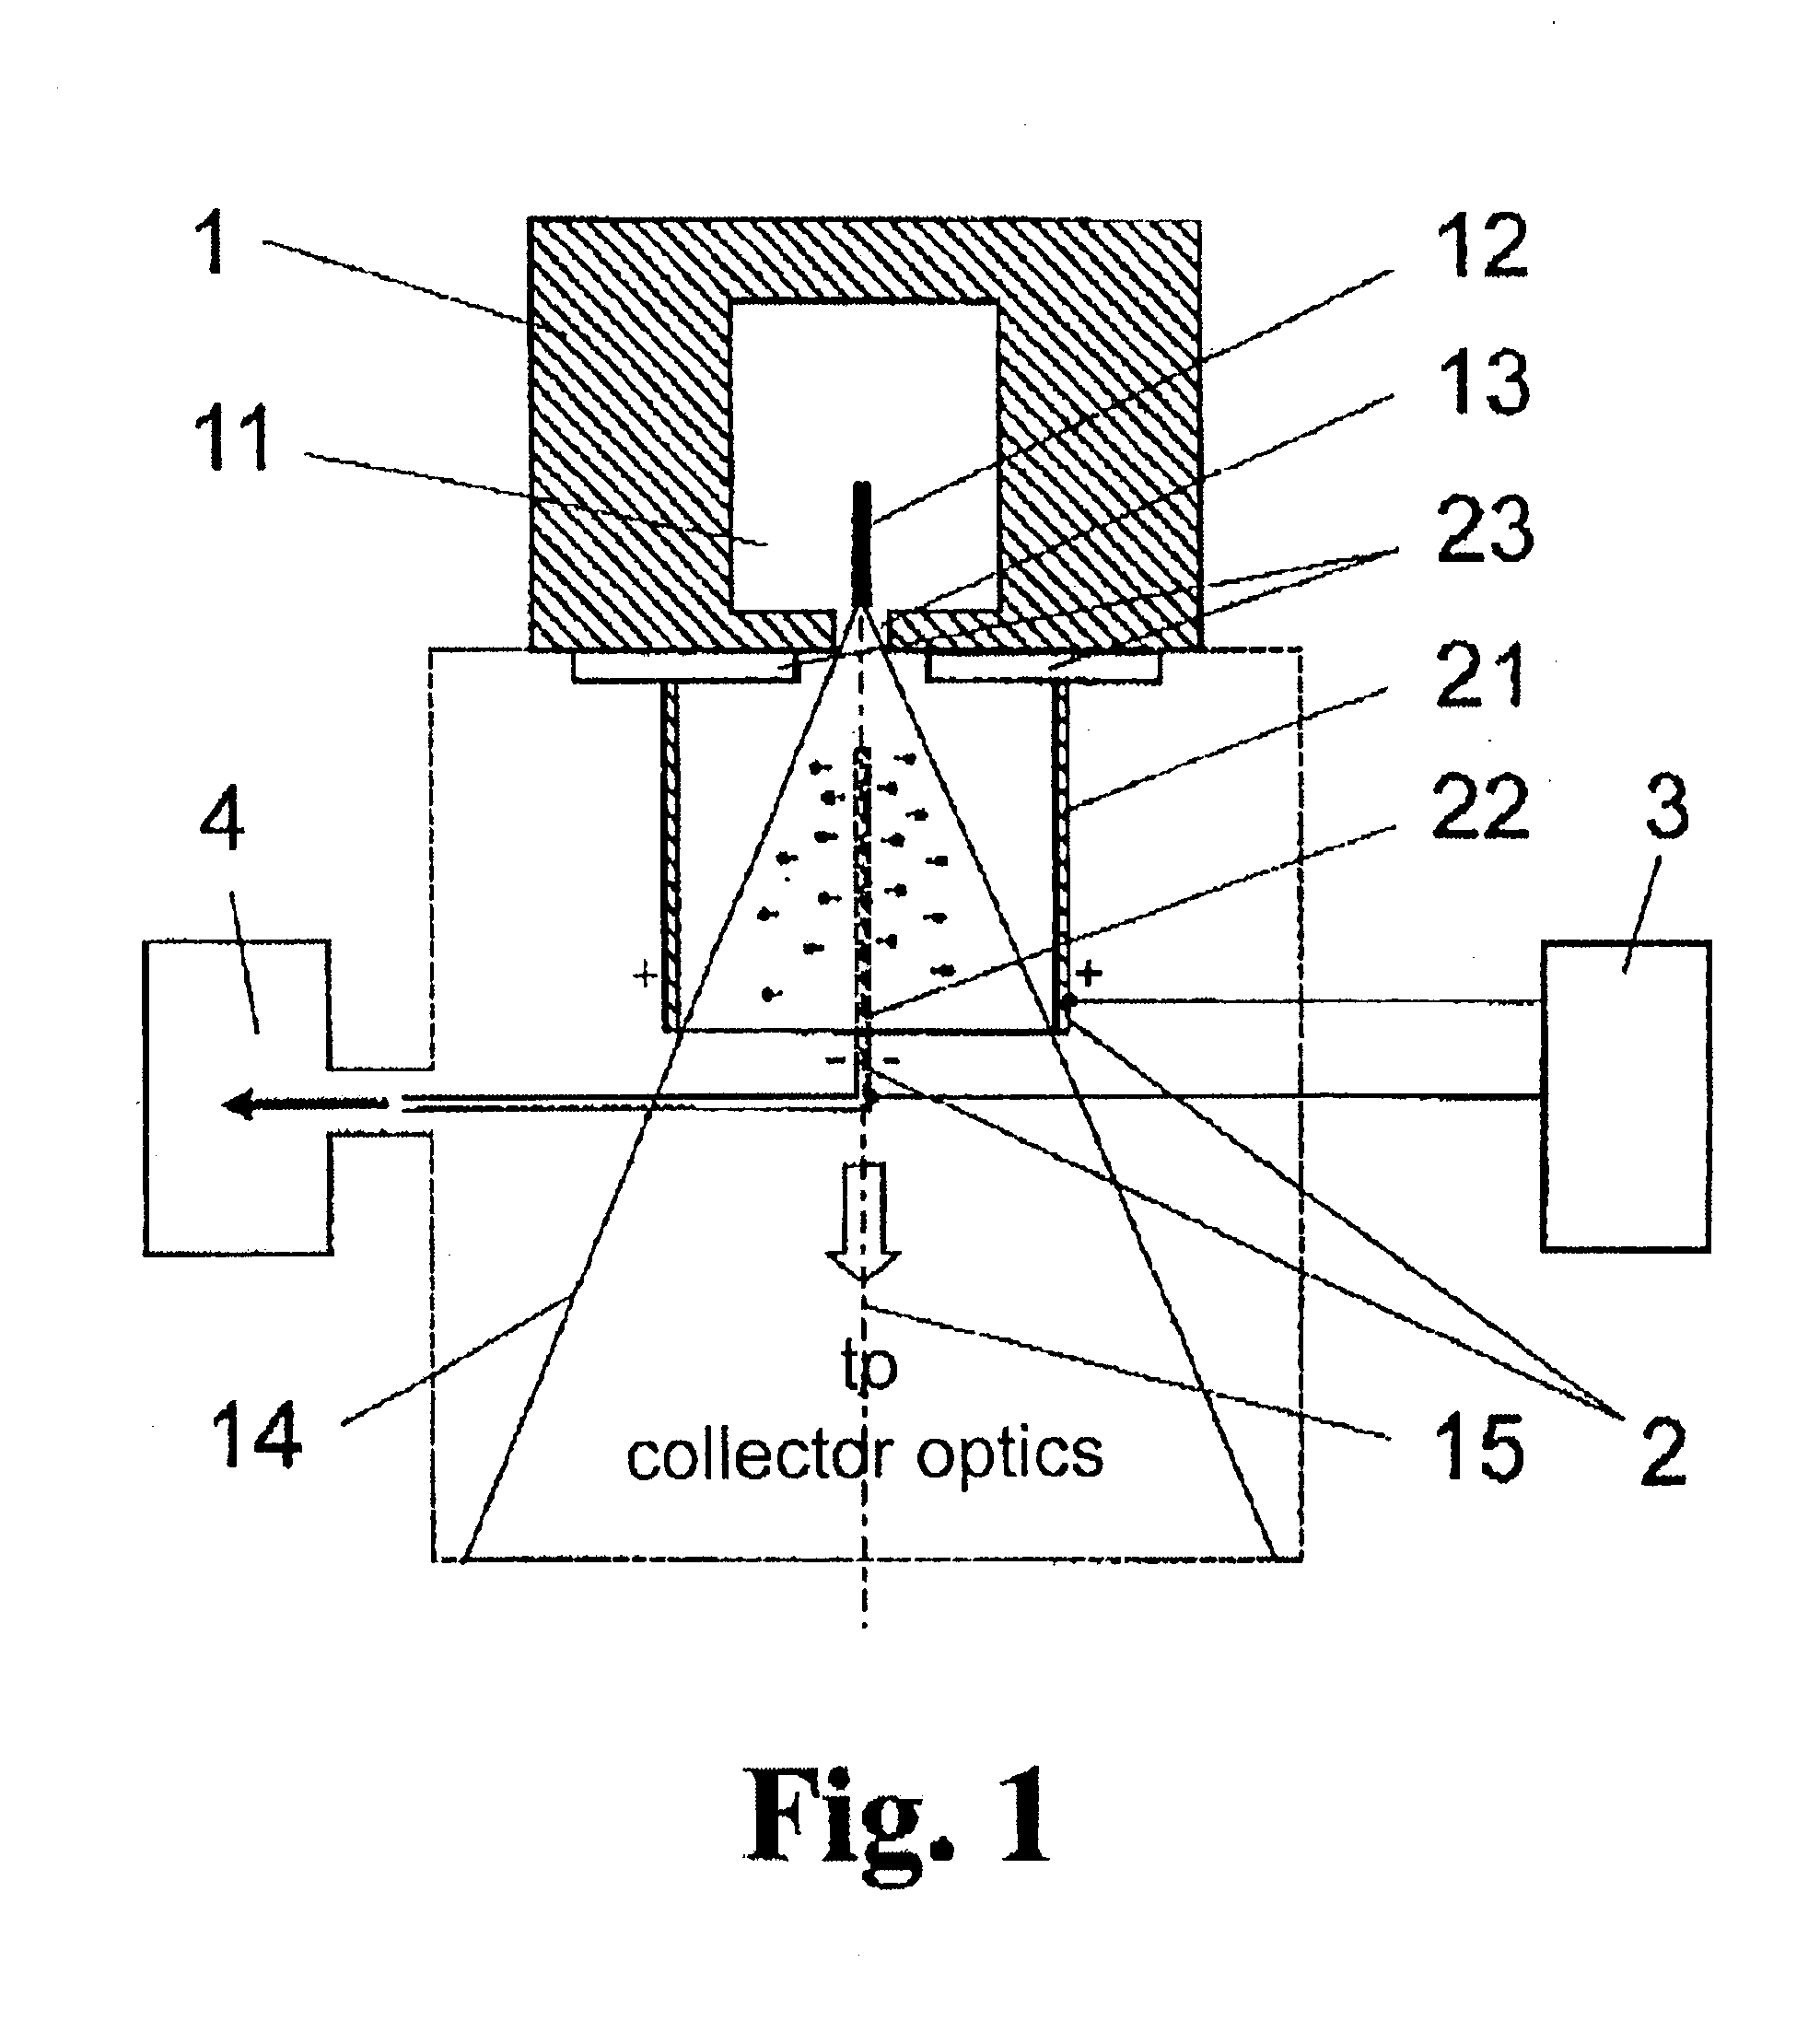 Arrangement for the suppression of particle emission in the generation of radiation based on hot plasma